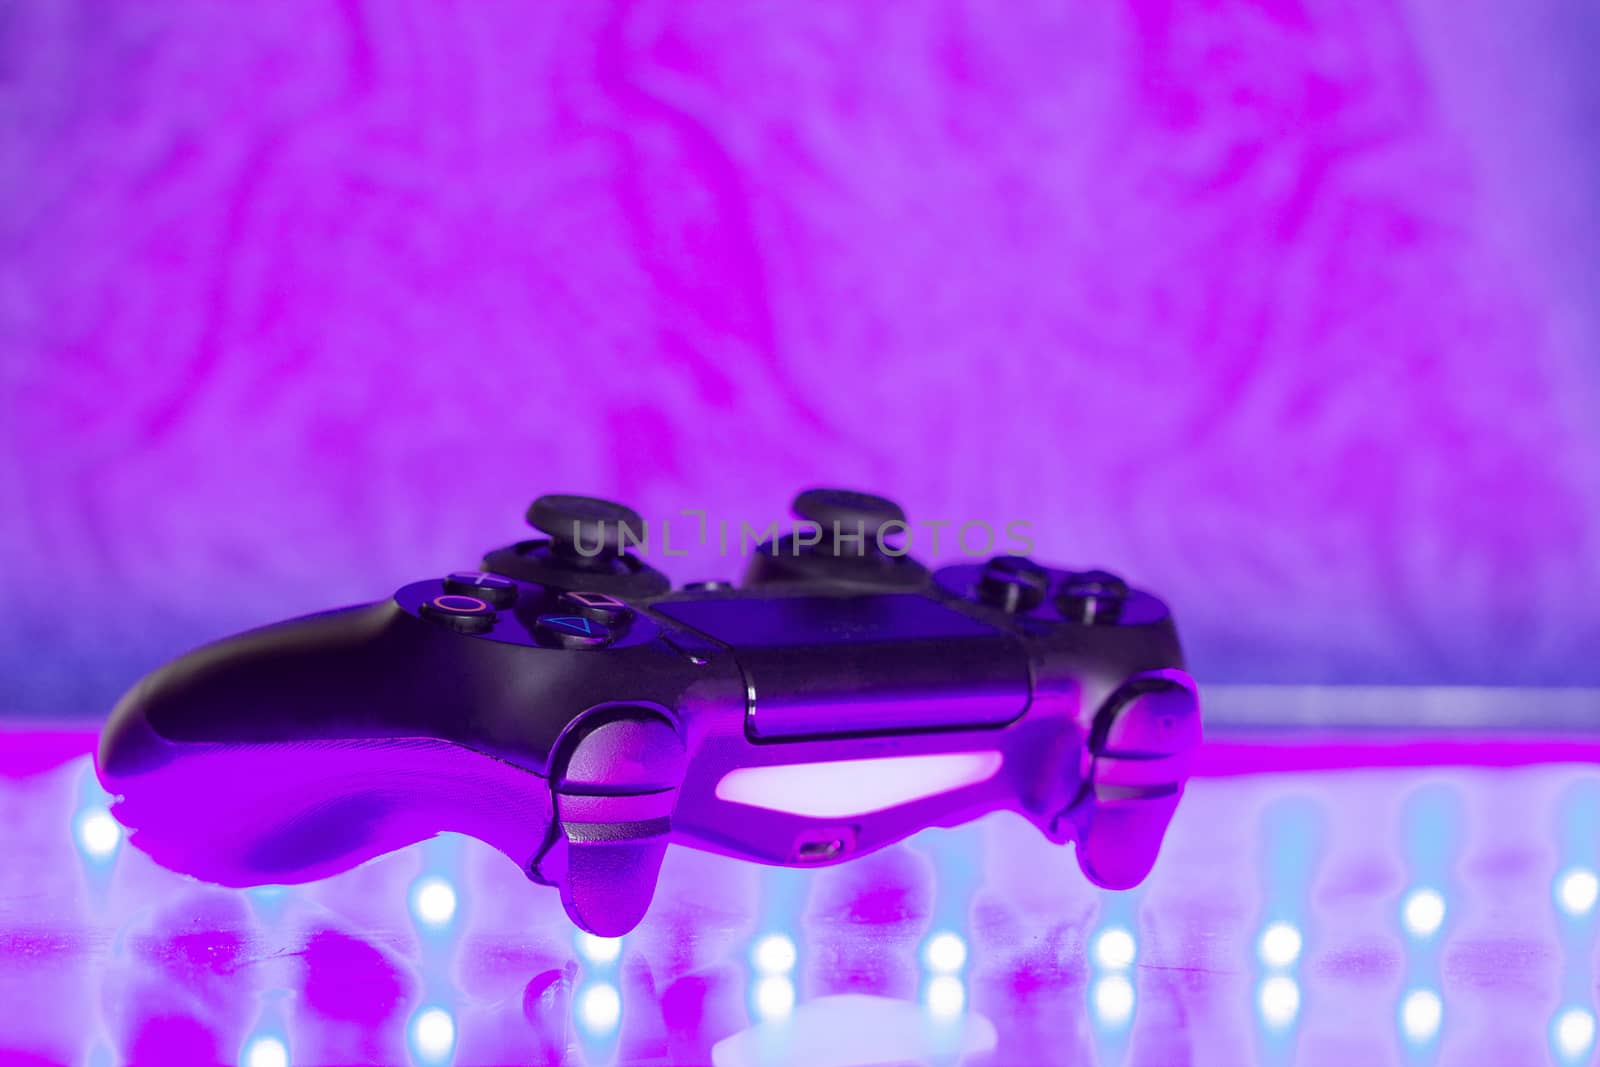 Game controller on illuminated table background. different colors